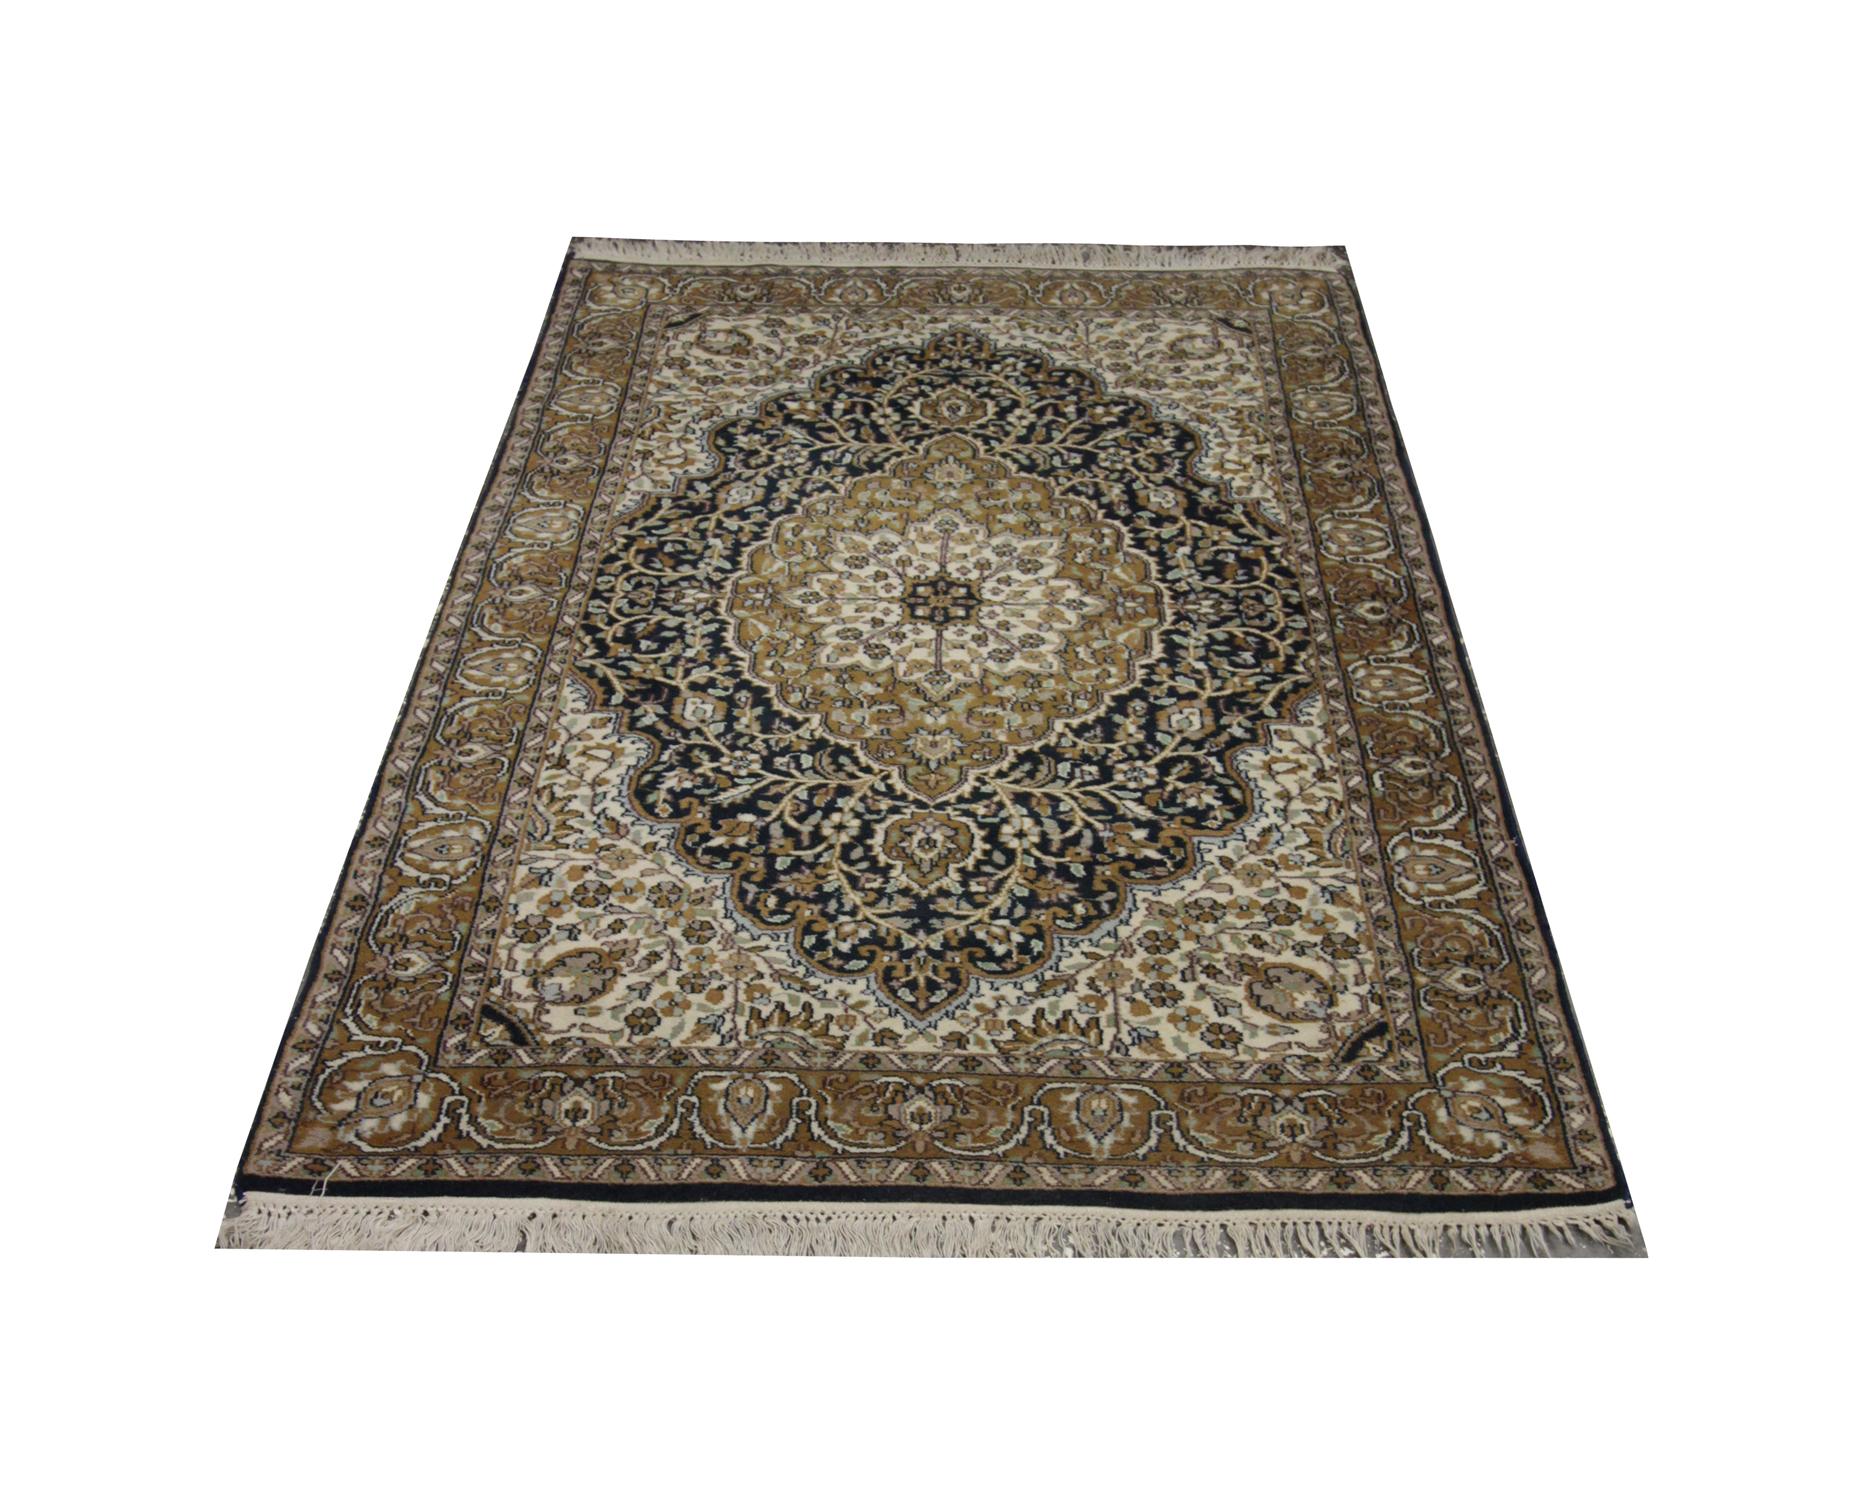 Upgrade your floors with this vintage Indian rug, hand knotted in 1970 with hand-spun, vegetable-dyed wool and cotton, woven by some of the finest rug artisans. Perfect for any modern or traditional interiors, bedrooms, living rooms or even